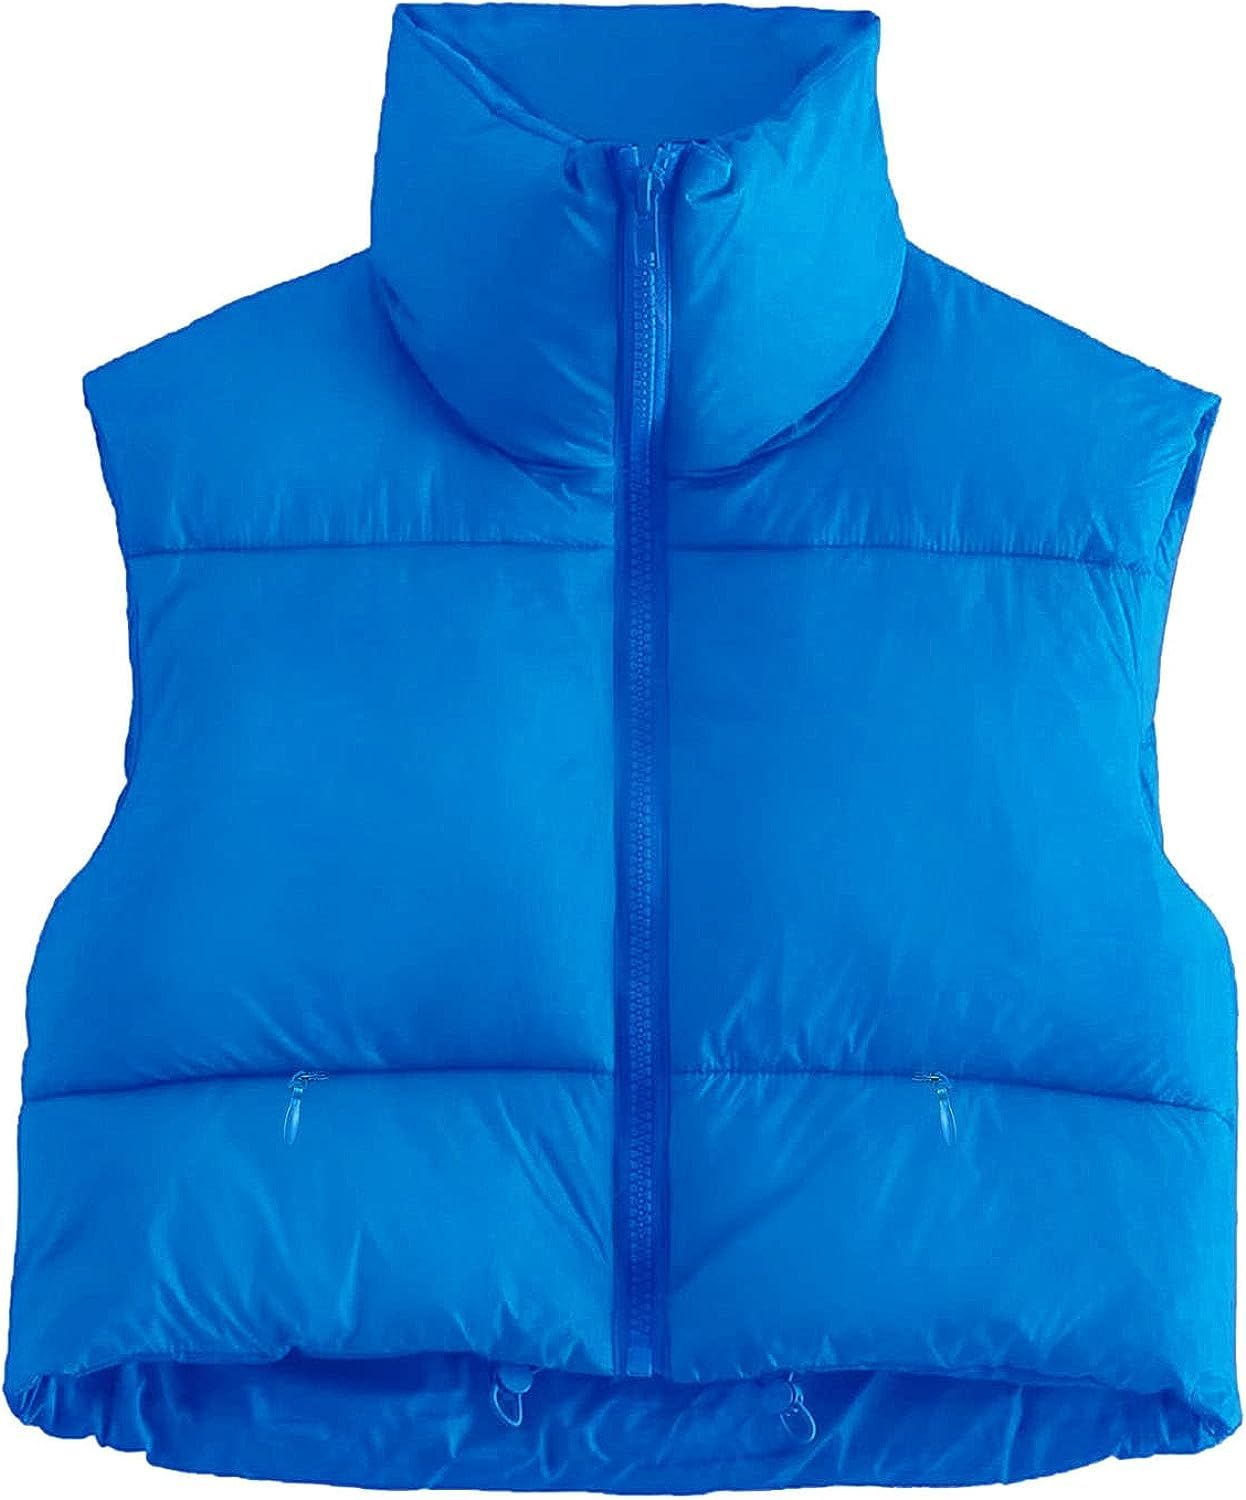 Flygo Women's Cropped Puffer Vest Zip Up Stand Collar Sleeveless Padded Bubble Vest | Amazon (US)